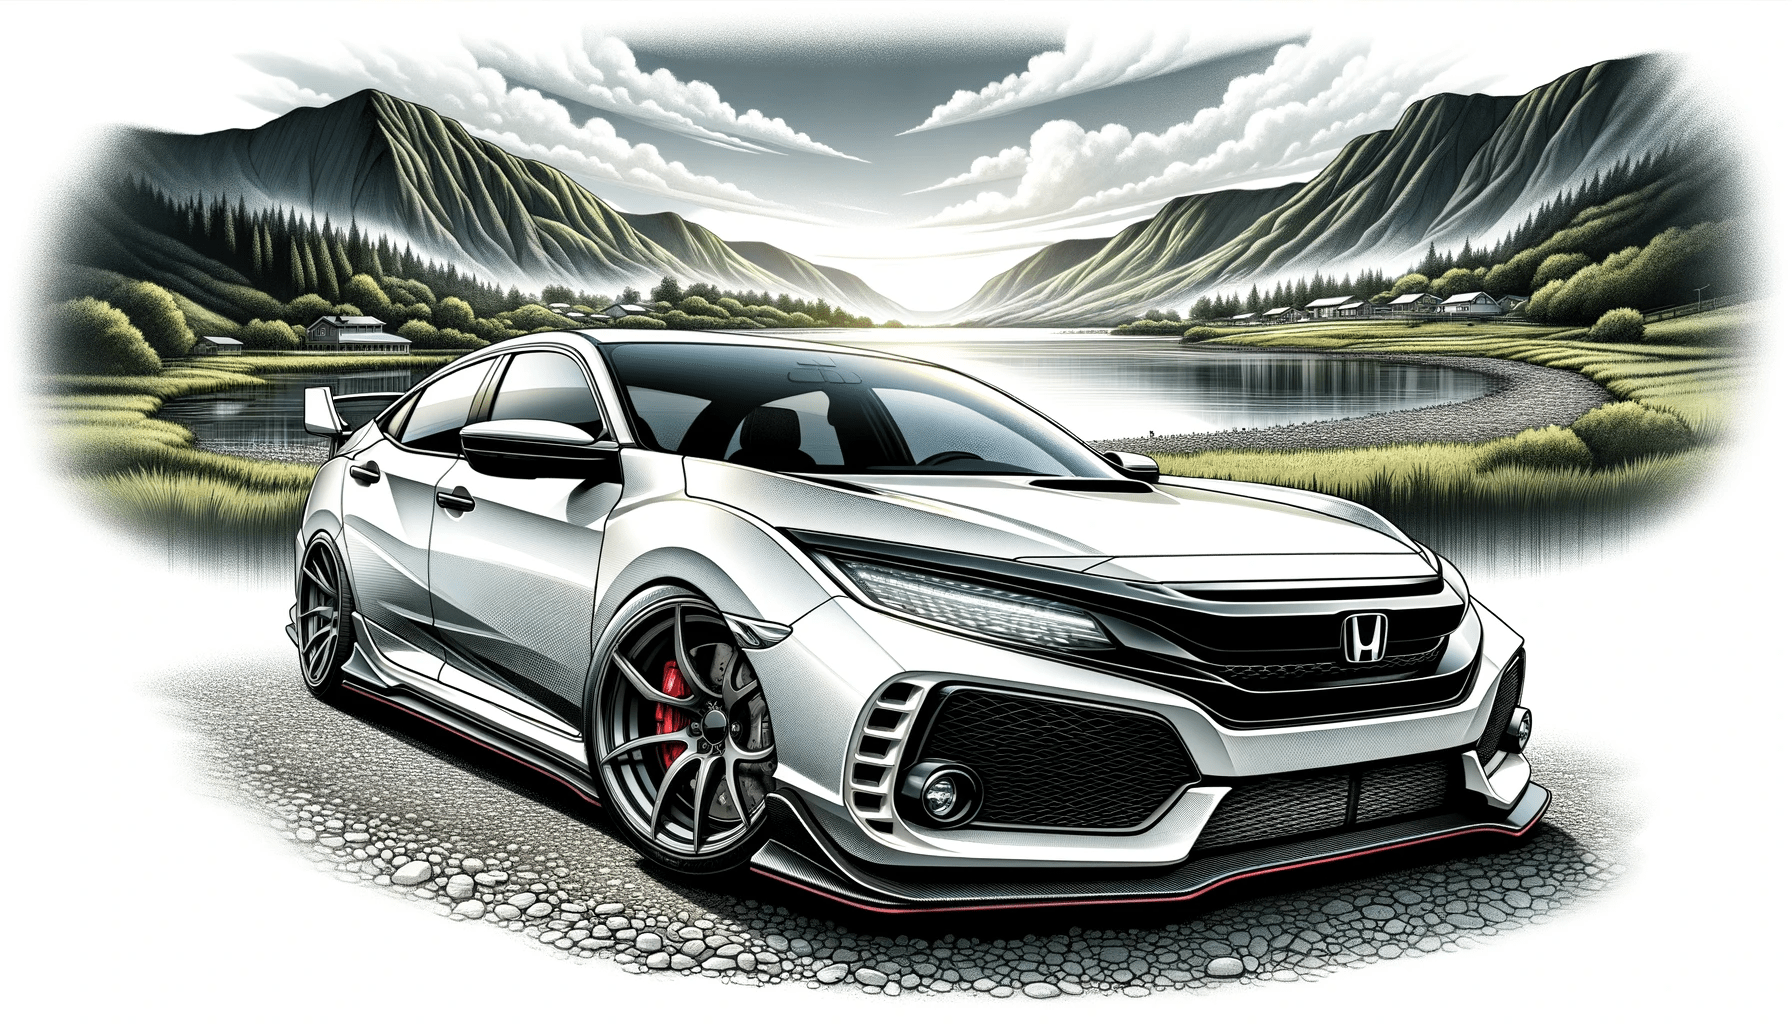 Honda performance car in the mountins